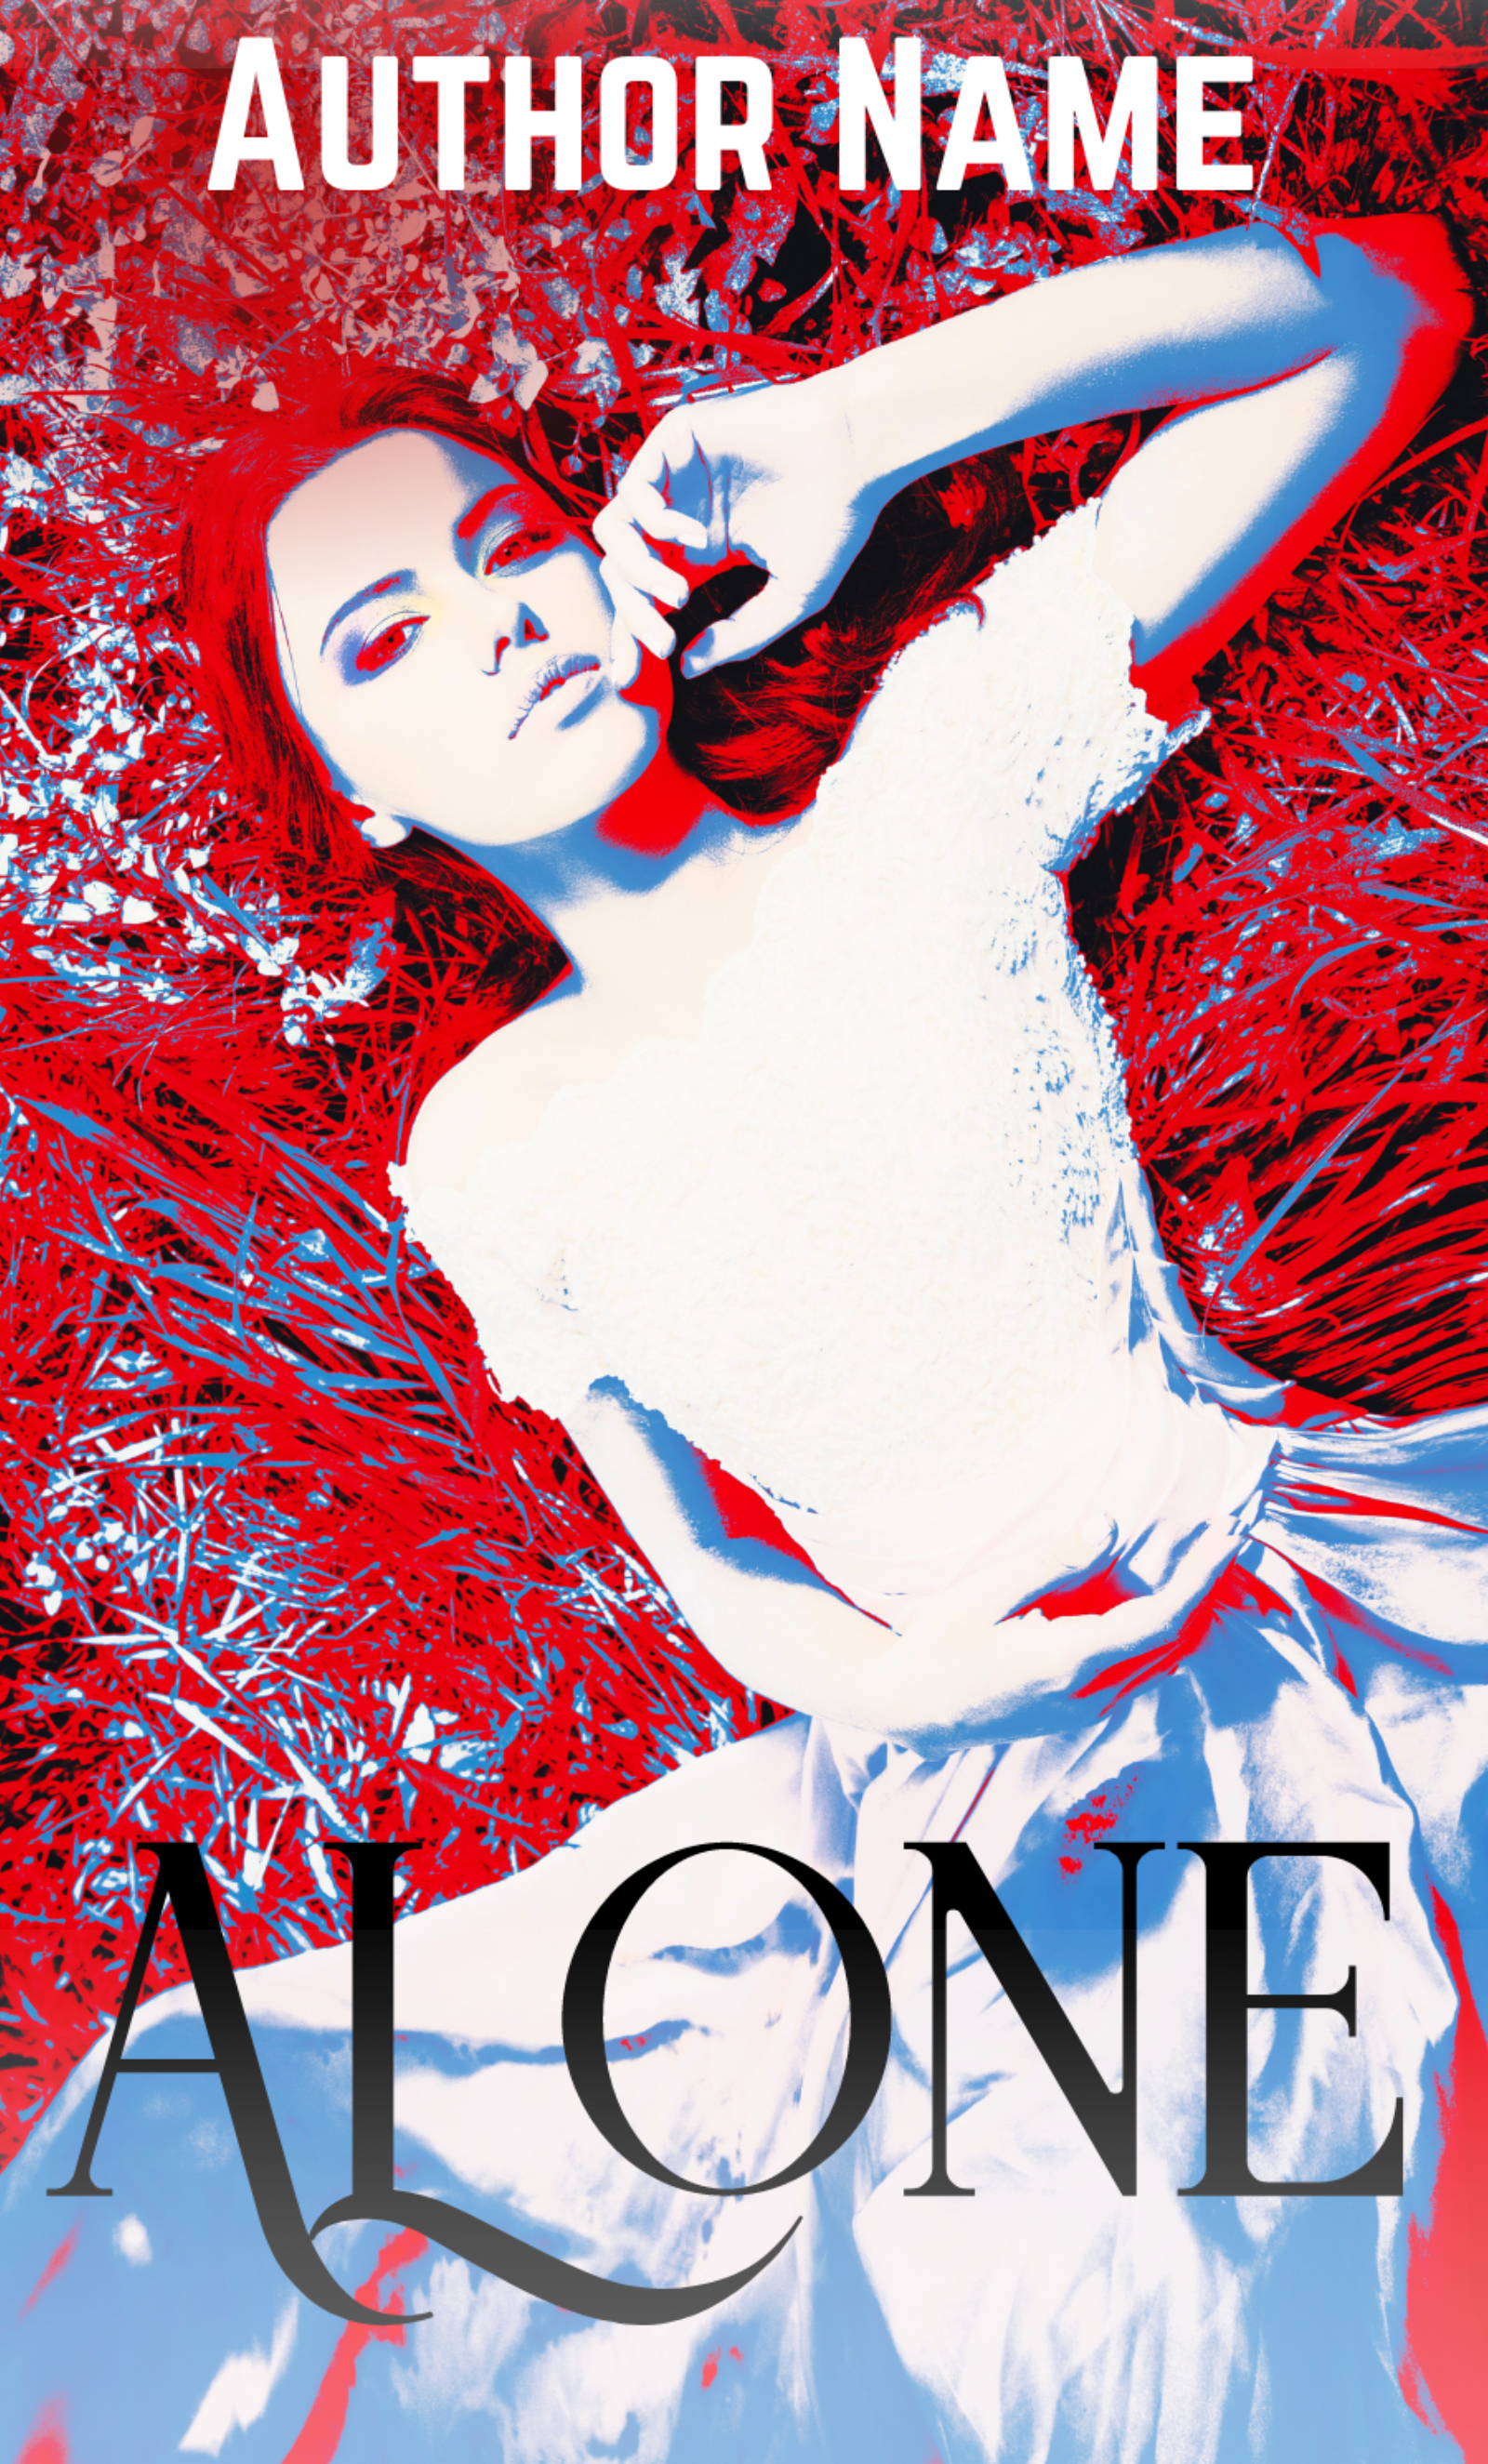 Premade Book Cover: Alone. A beautiful woman lives in solitude. Abstract, neon, retro, boho style. Romance, New Adult, Literary fiction genres.